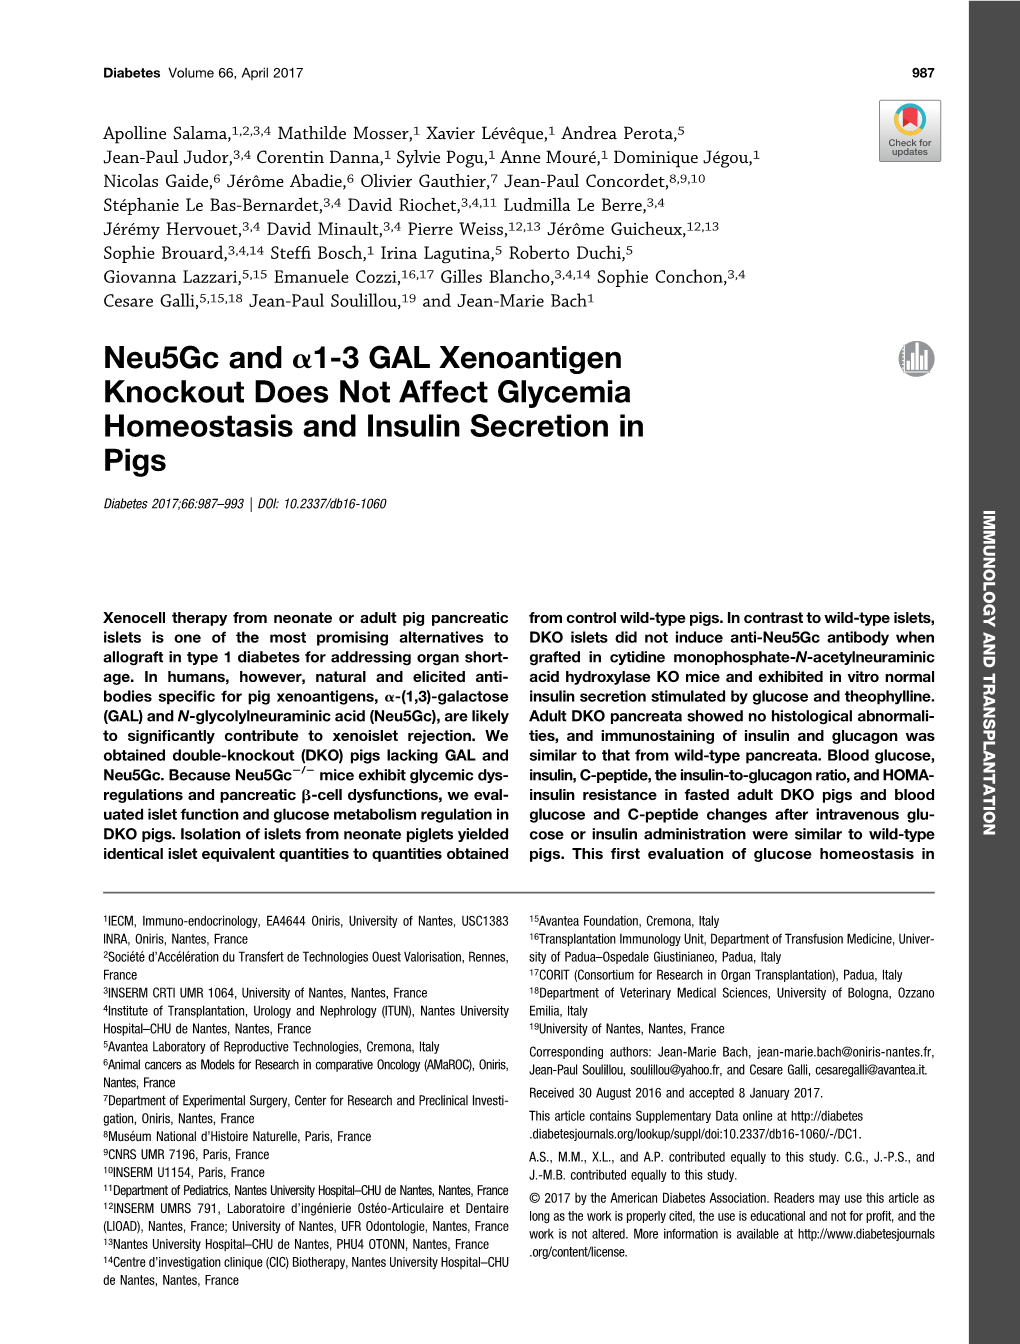 Neu5gc and Α1-3 GAL Xenoantigen Knockout Does Not